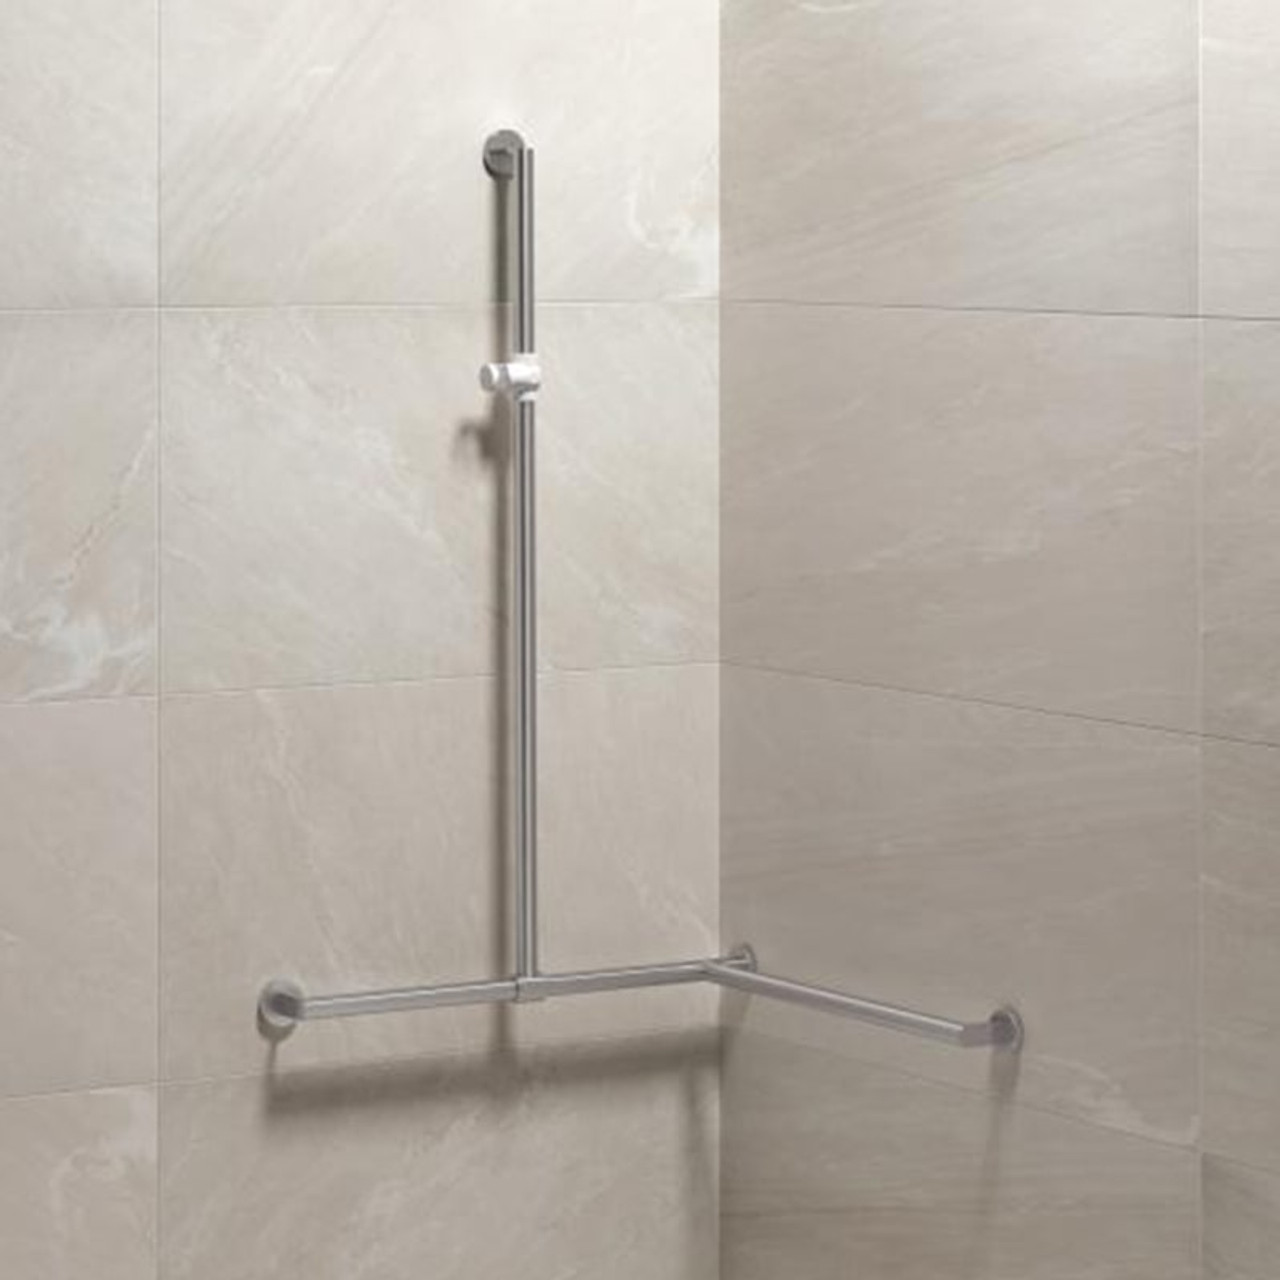 HEWI Stainless Steel Grab Bar with Adjustable Vertical Support - Series 900 - Application